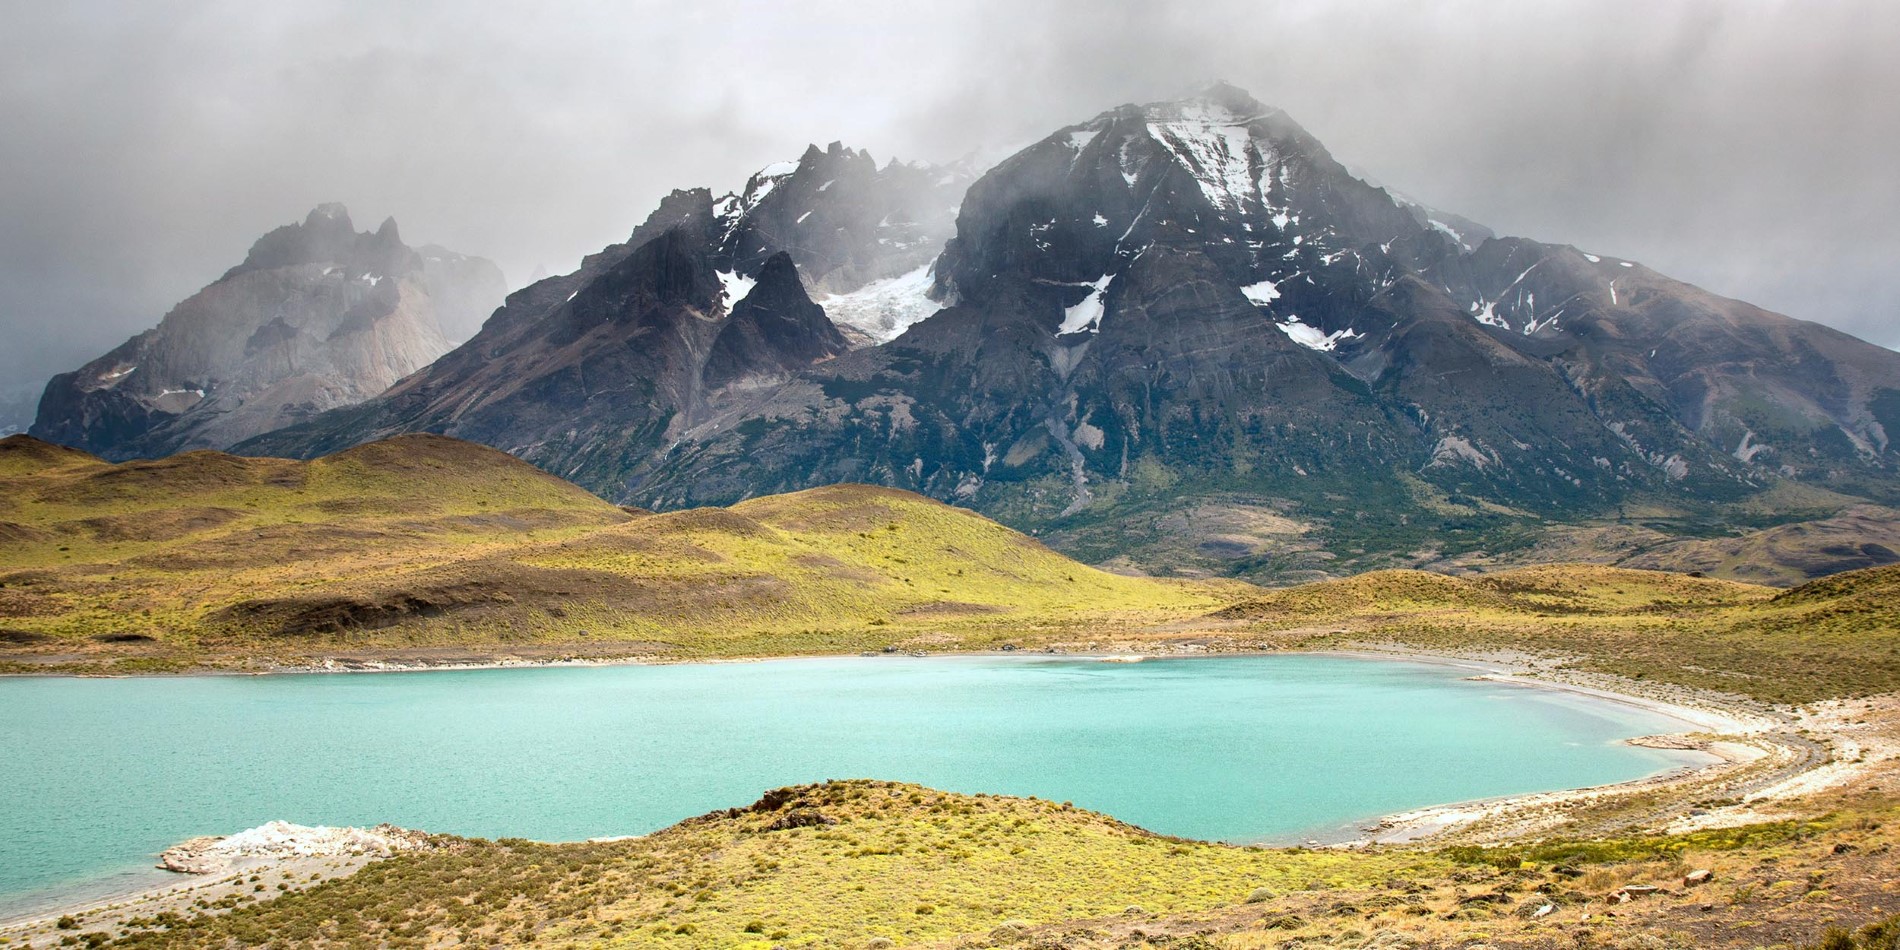 A body of water with Torres del Paine National Park in the background